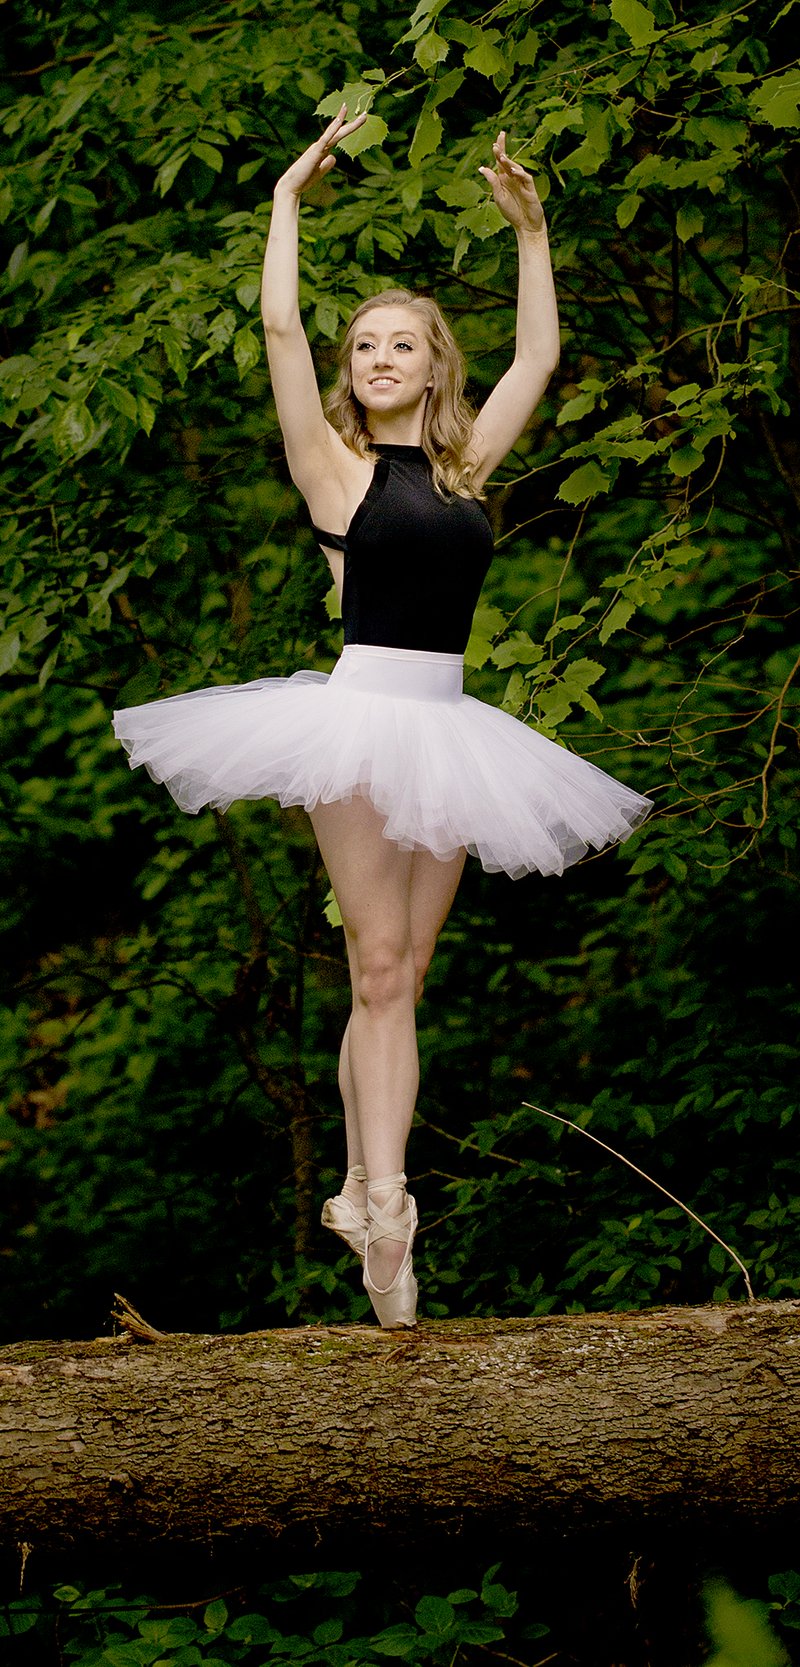 Luke Davis/Main Street Studios Taylor Stewart, 17, of Siloam Springs has been practicing ballet in Northwest Arkansas since she was 3 years old. Stewart, the daughter of Jeff and Kristin Stewart, will be joining the trainee program of Ballet Magnificat! School of Arts in Jackson, Miss.